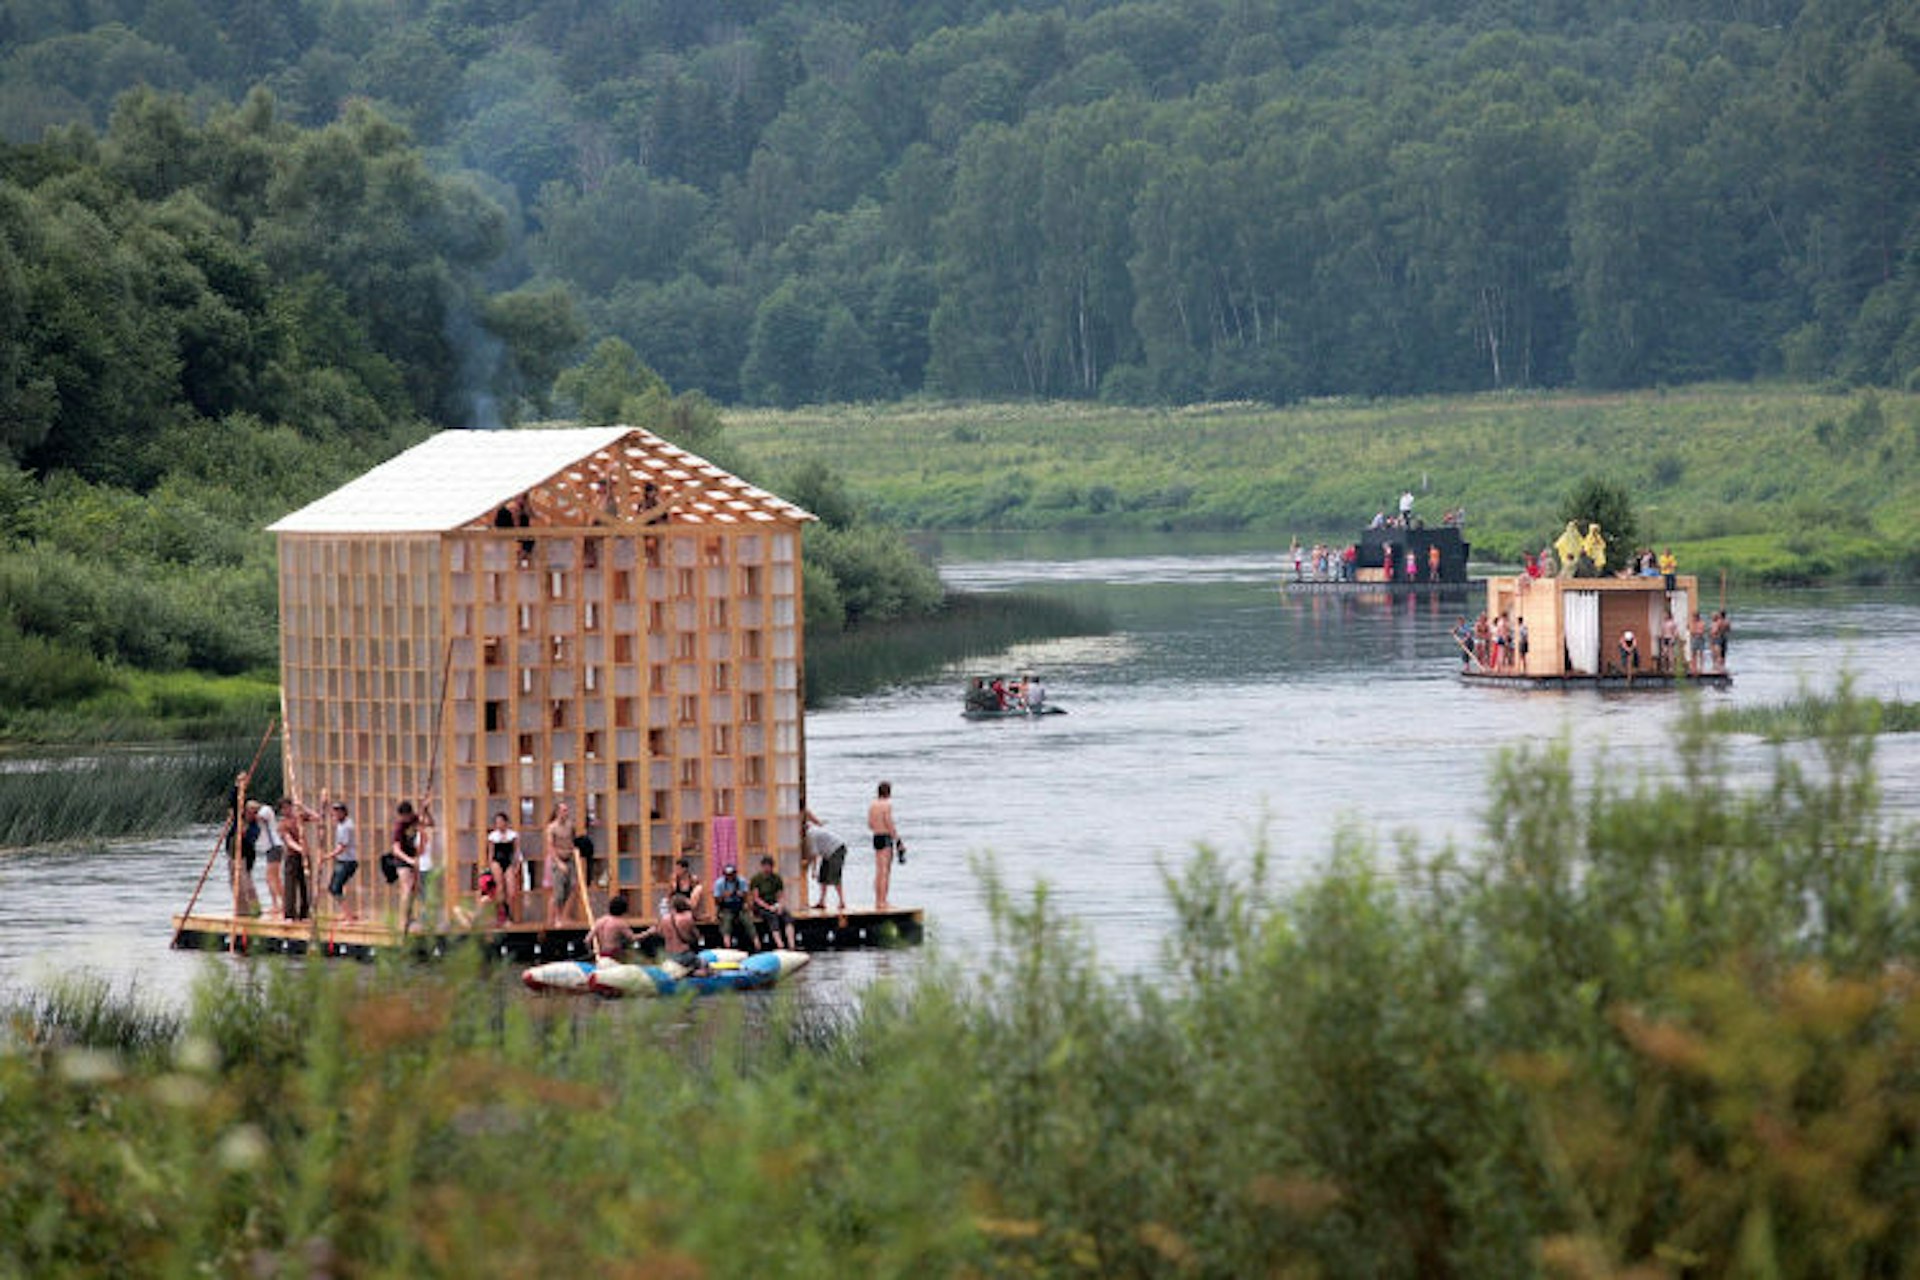 Architects riding their Noah's arks at the 2008 Archstoyanie festival at Nikola-Lenivets. Image by Sergey Shakhidjanian / AFP / Getty Images